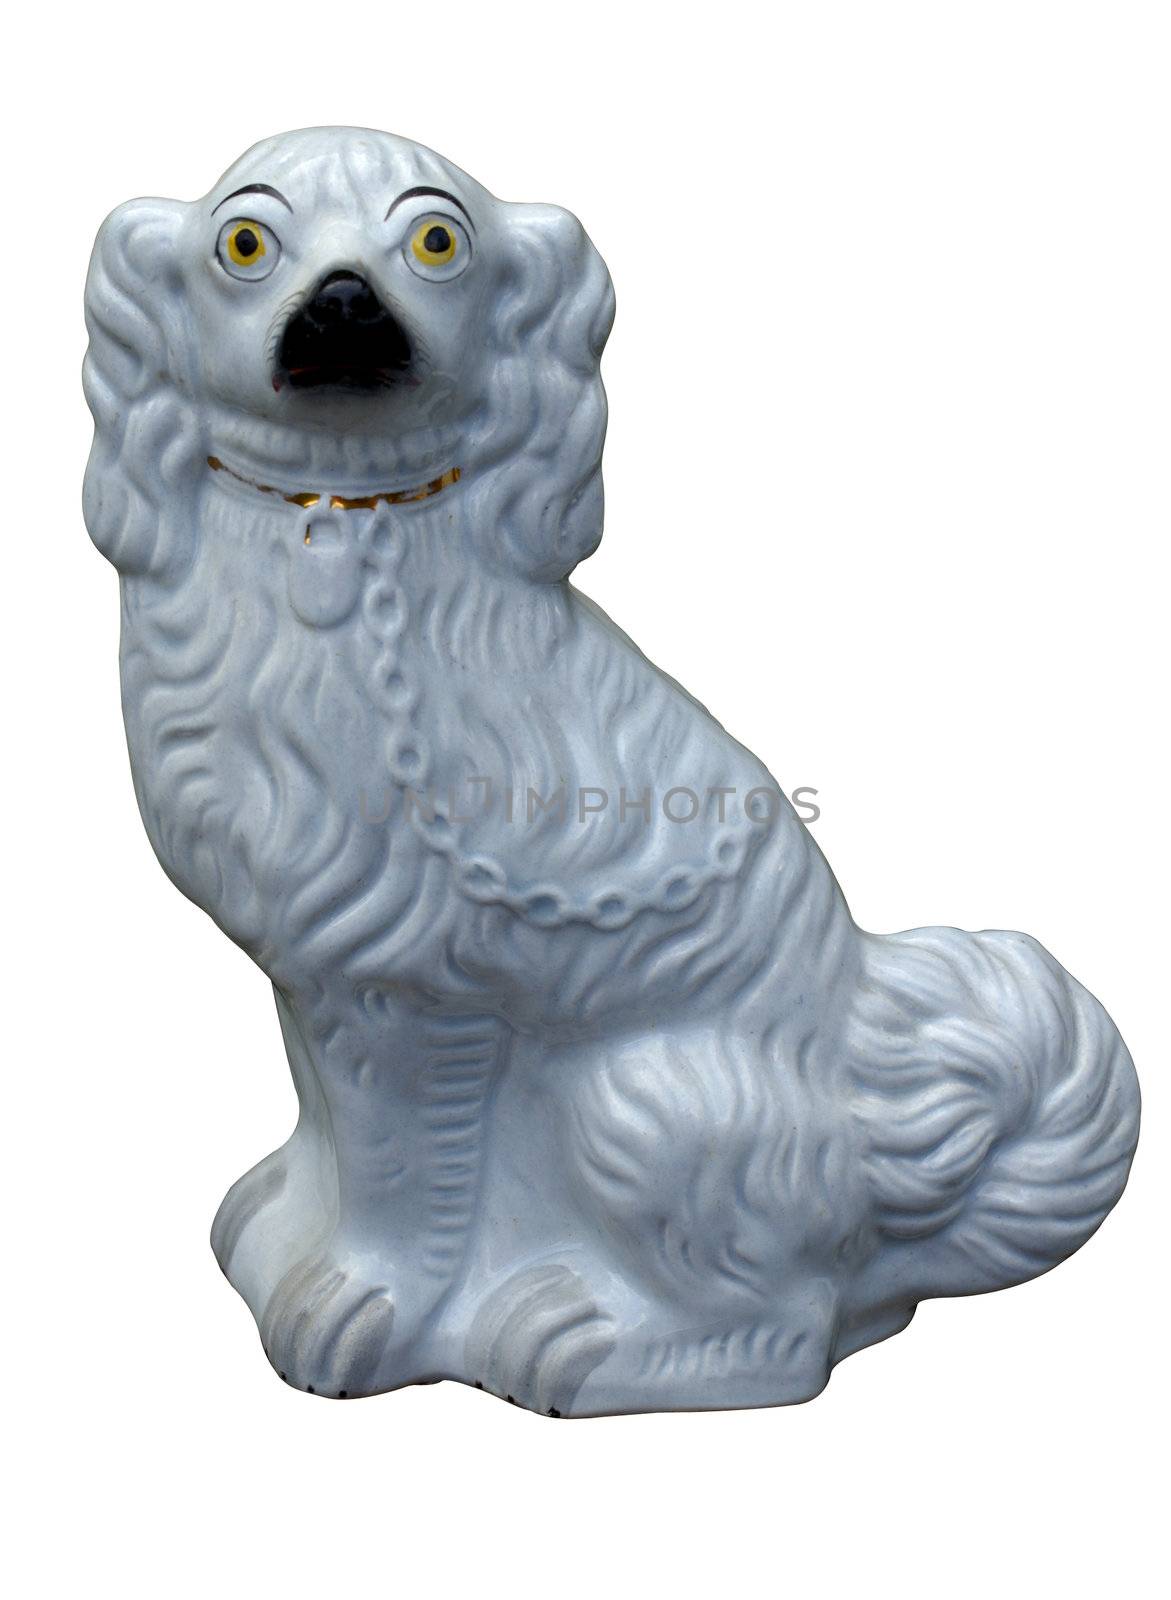 An antique Staffordshire pottery dog, on plain white background (with clipping path).